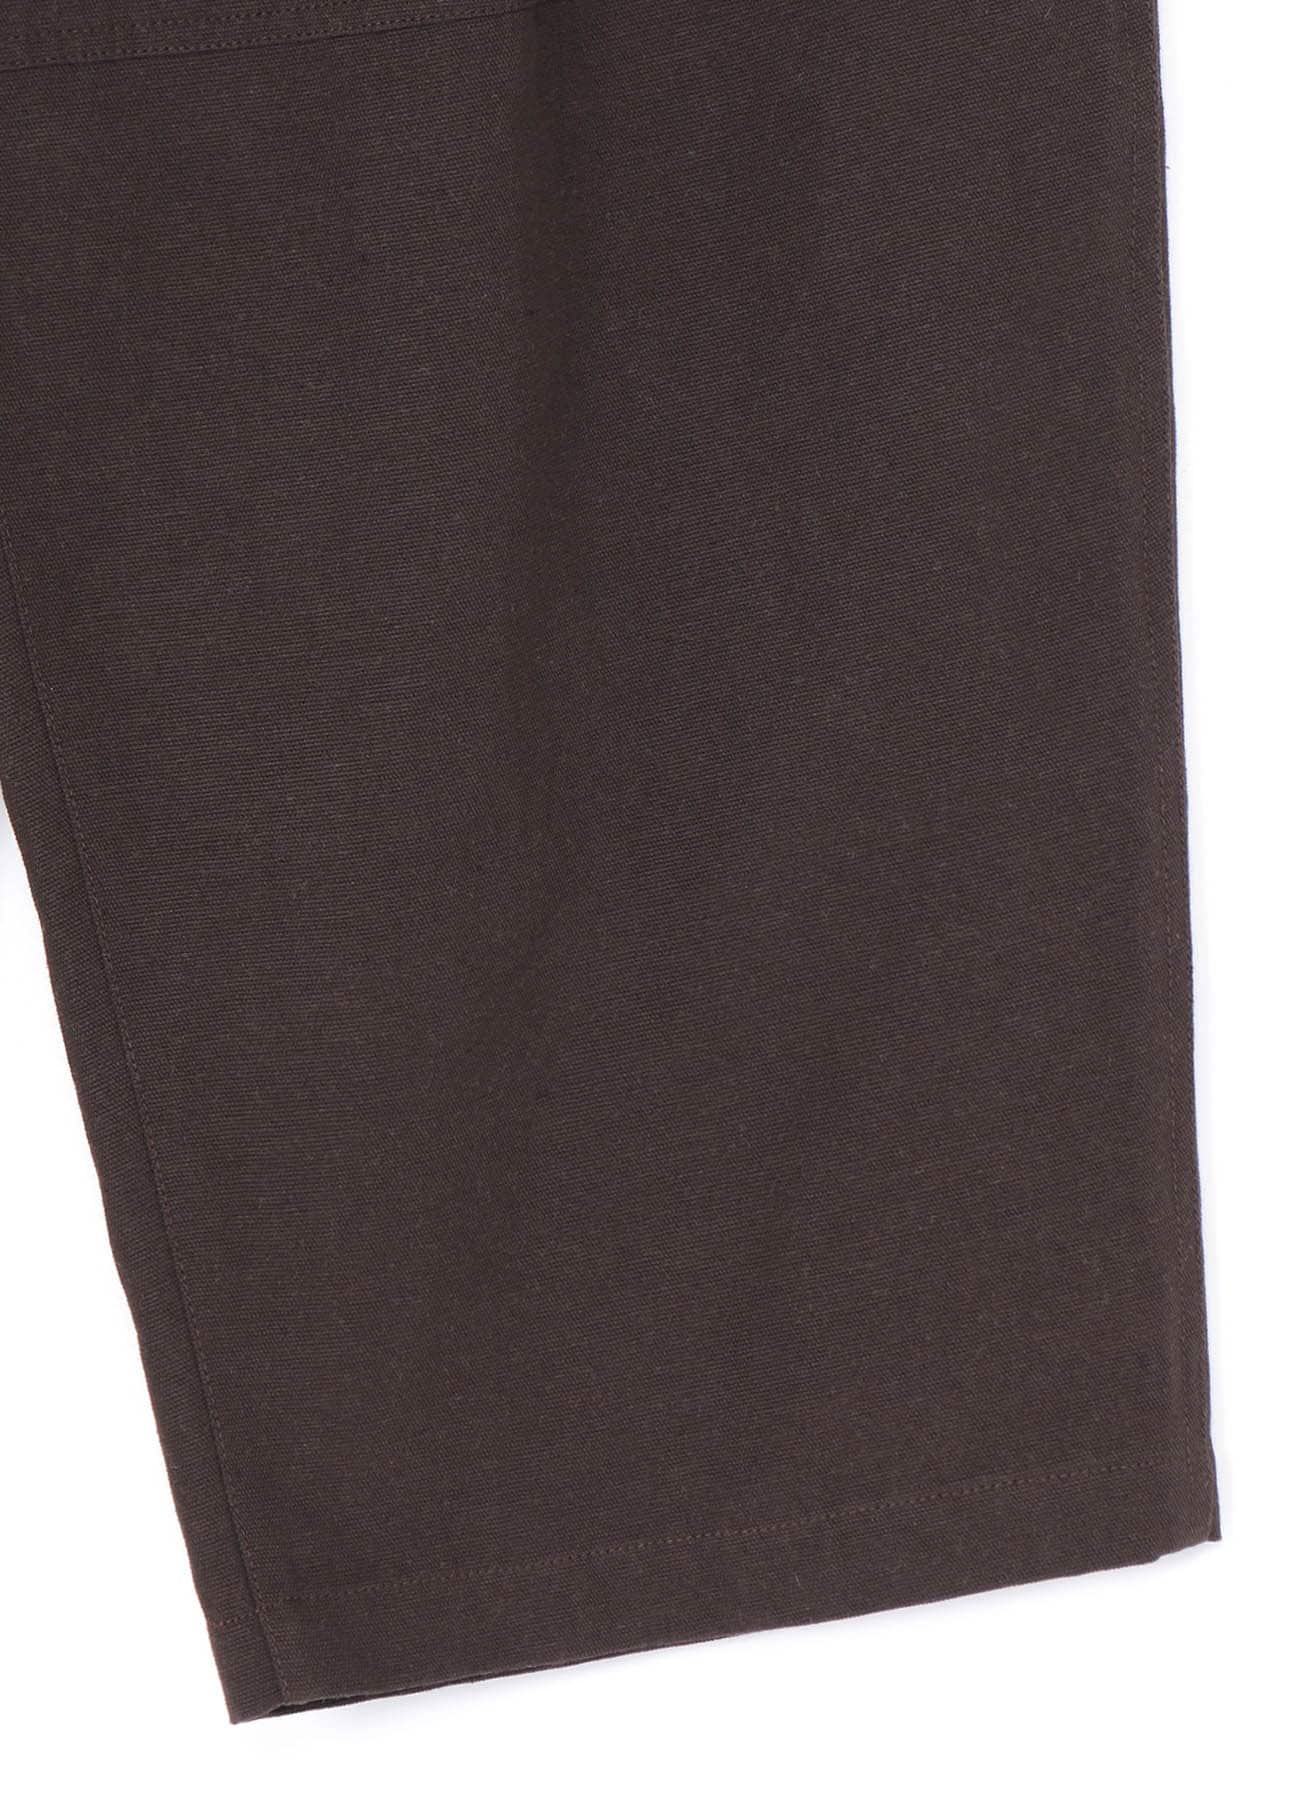 COTTON FLAX WOOL OXFORD SIDE ACTION PLEATS PANTS